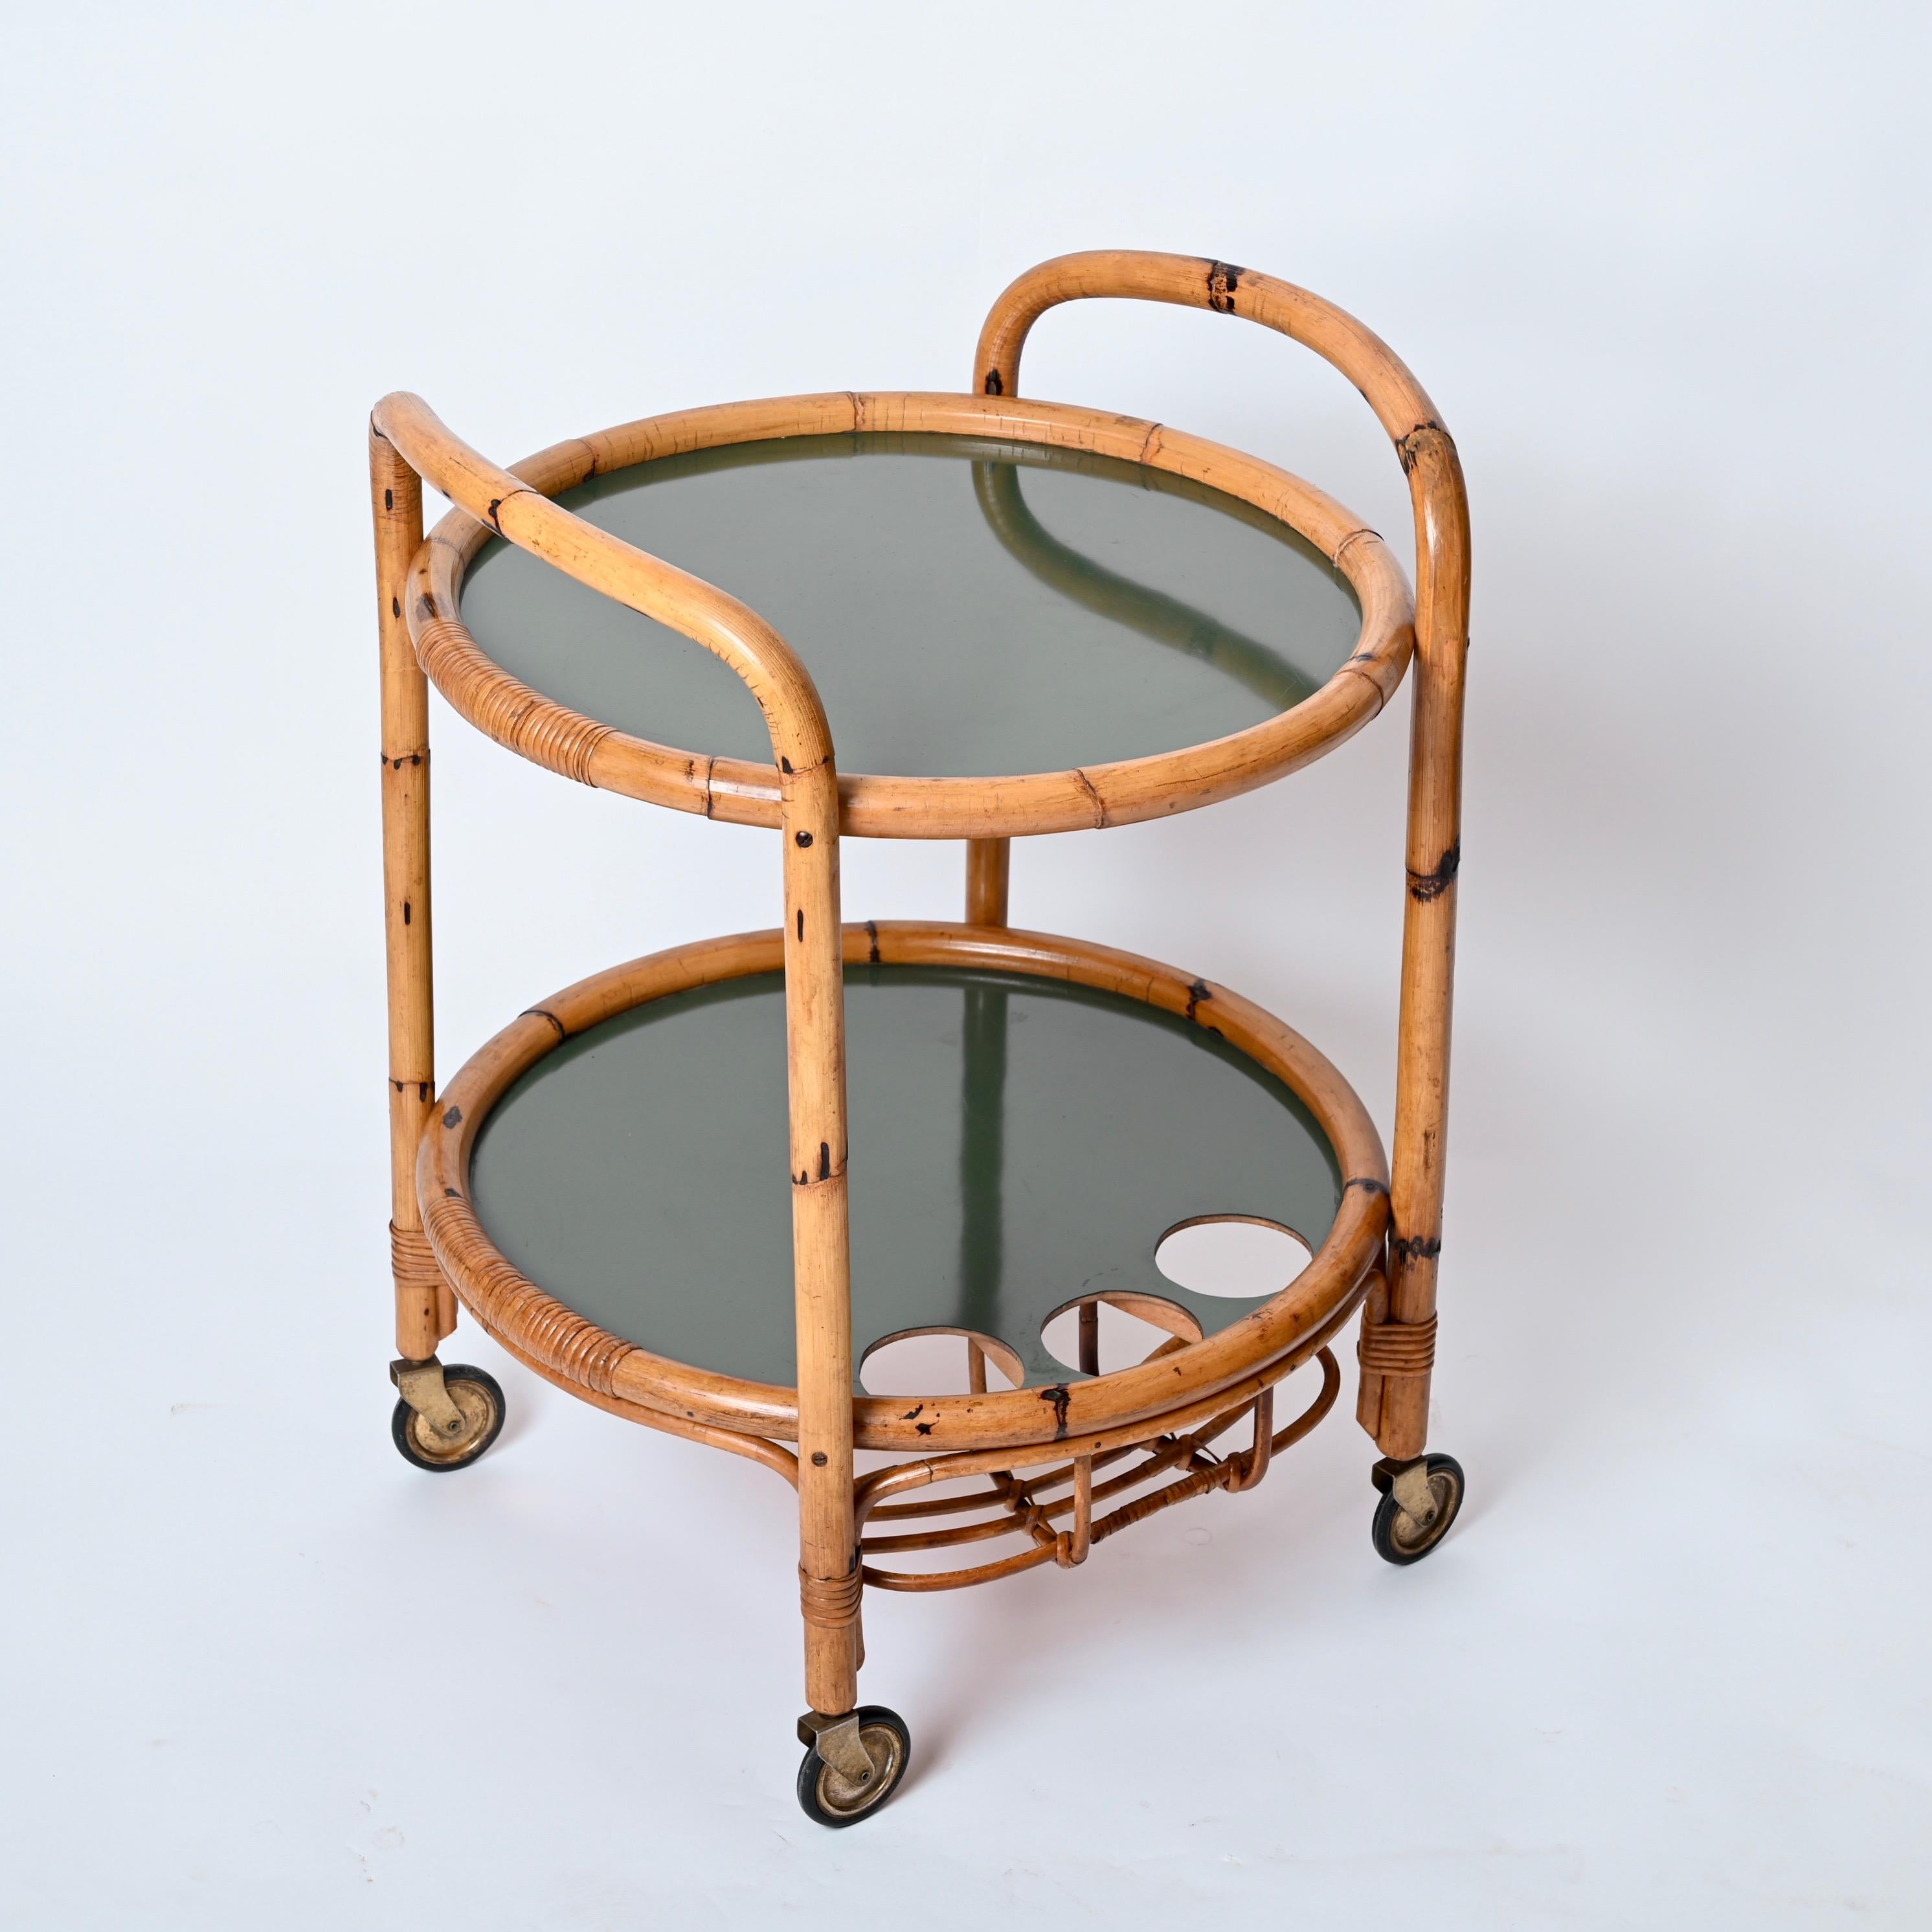 Midcentury Bar Serving Cart in Bamboo, Rattan and Green Formica, Italy, 1970s For Sale 4